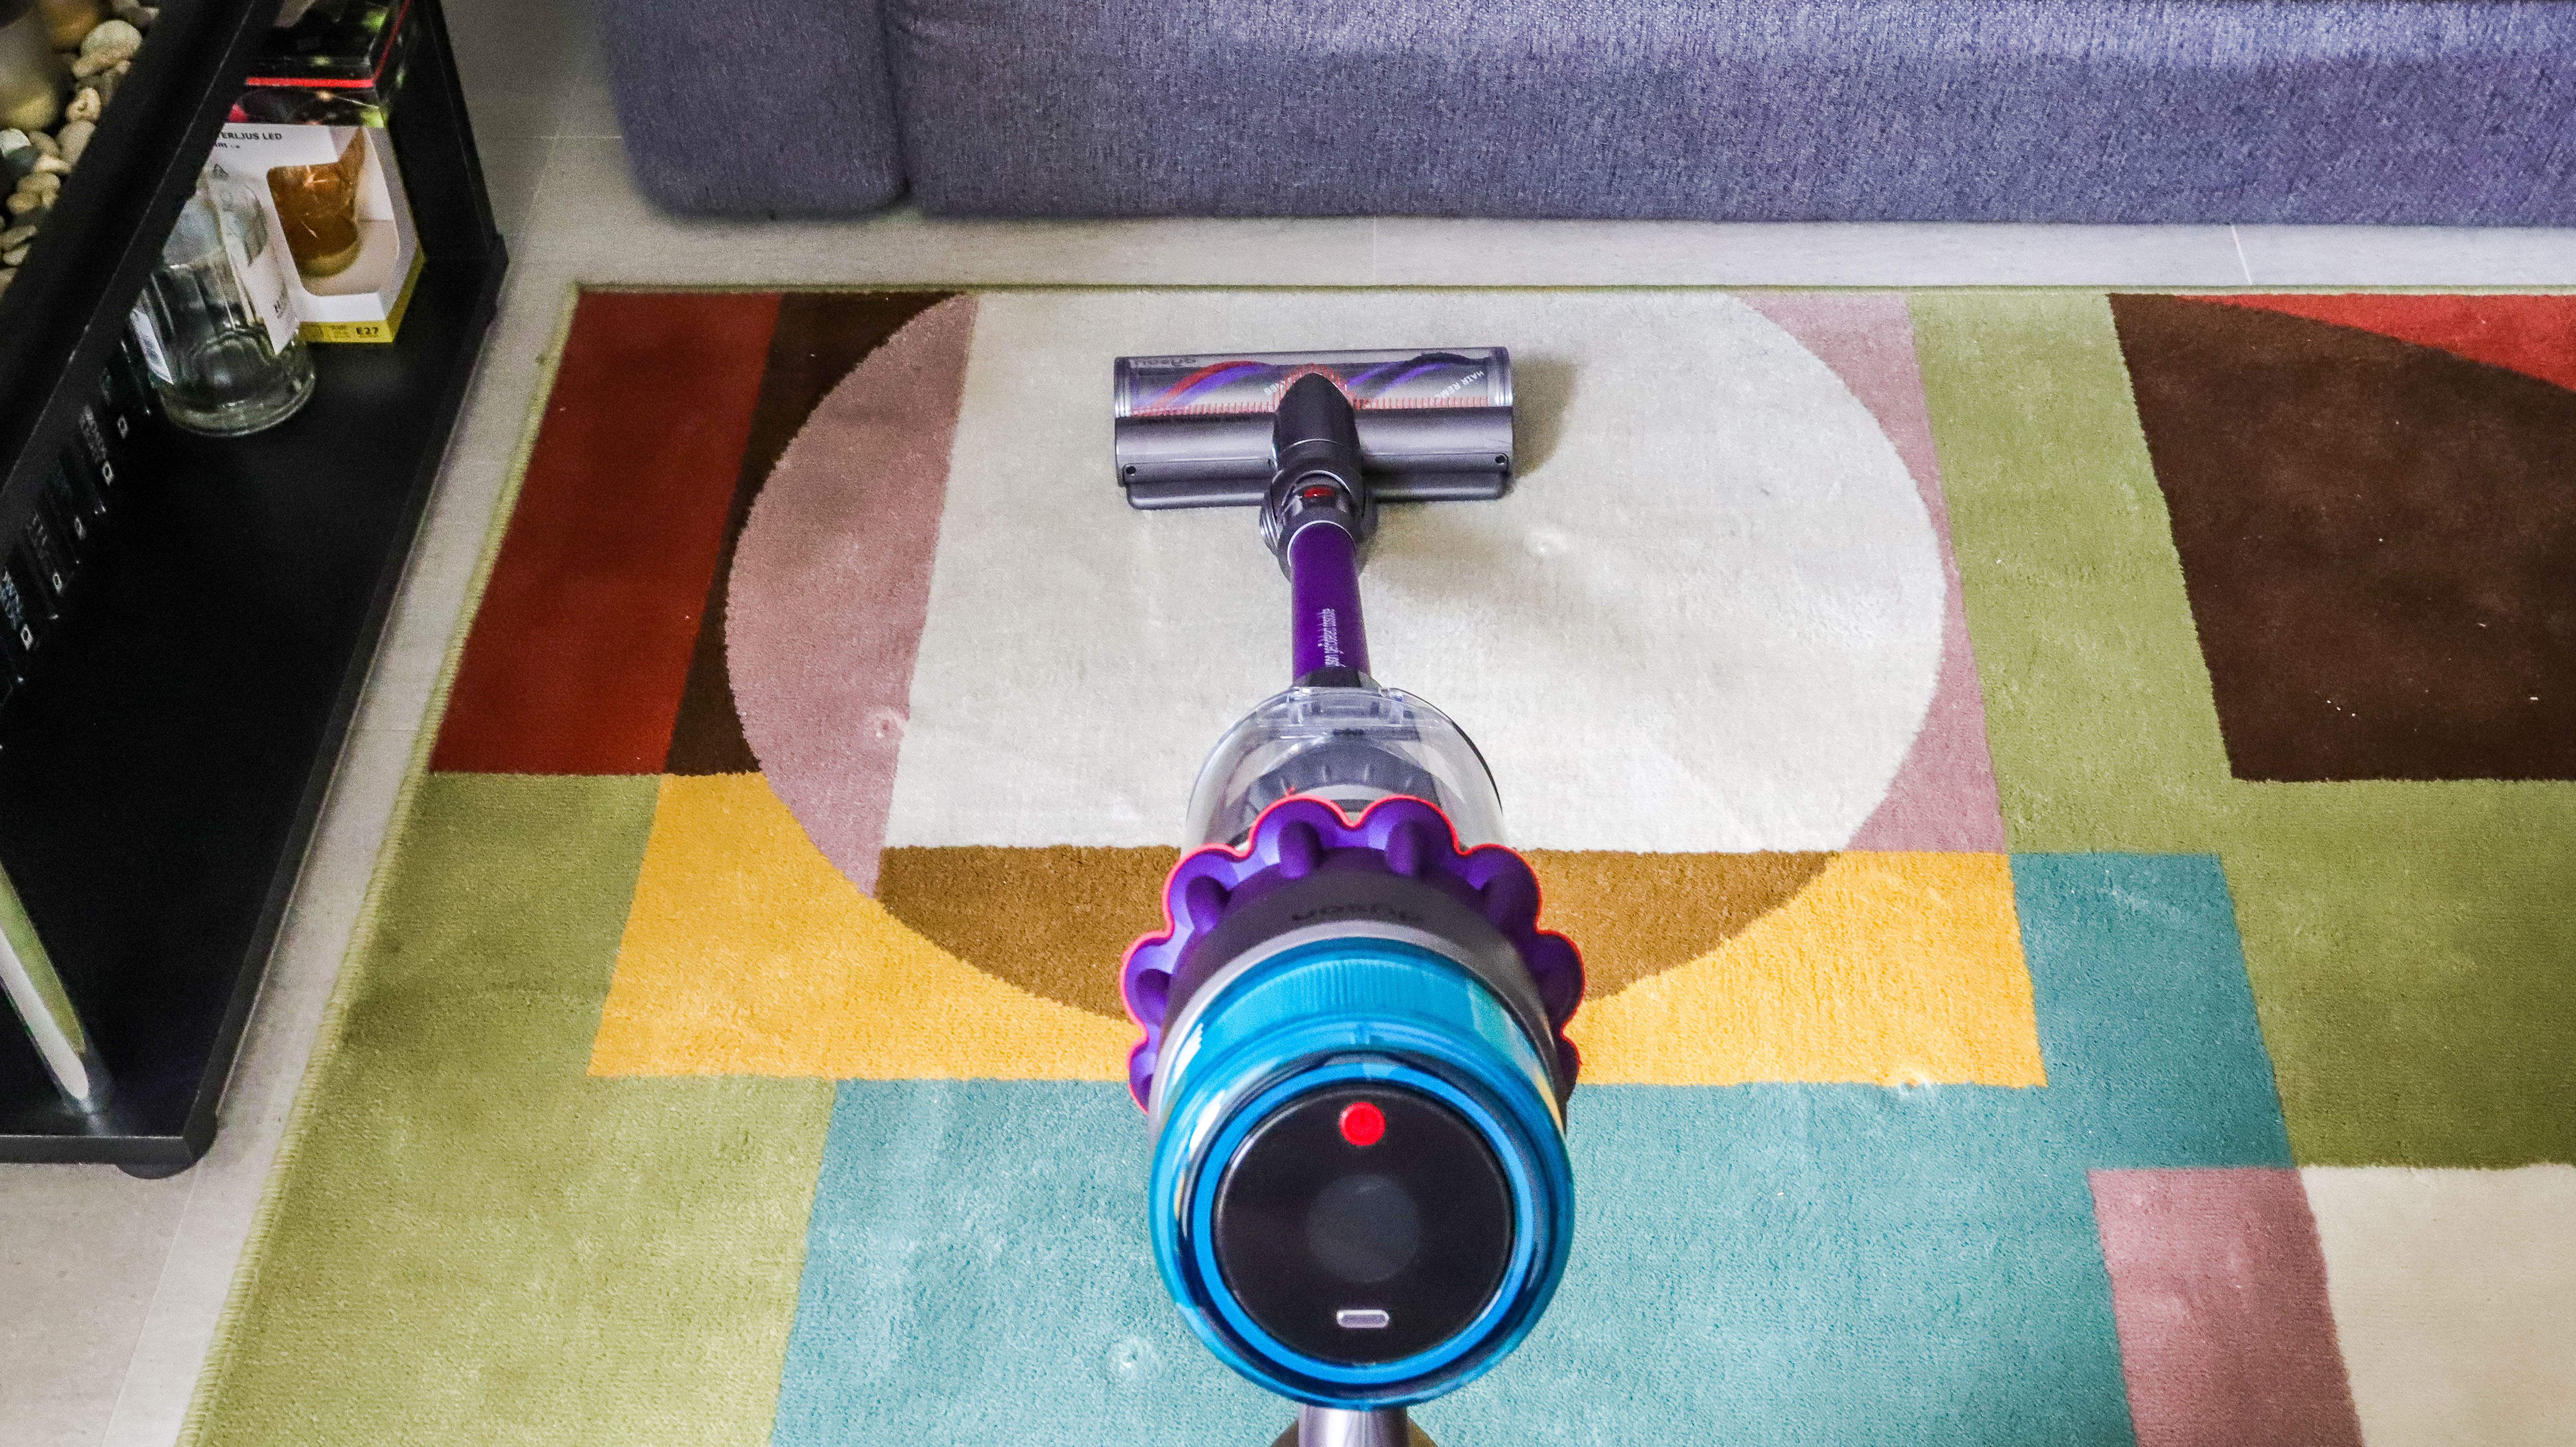 Dyson Gen5 Detect being used on a rug